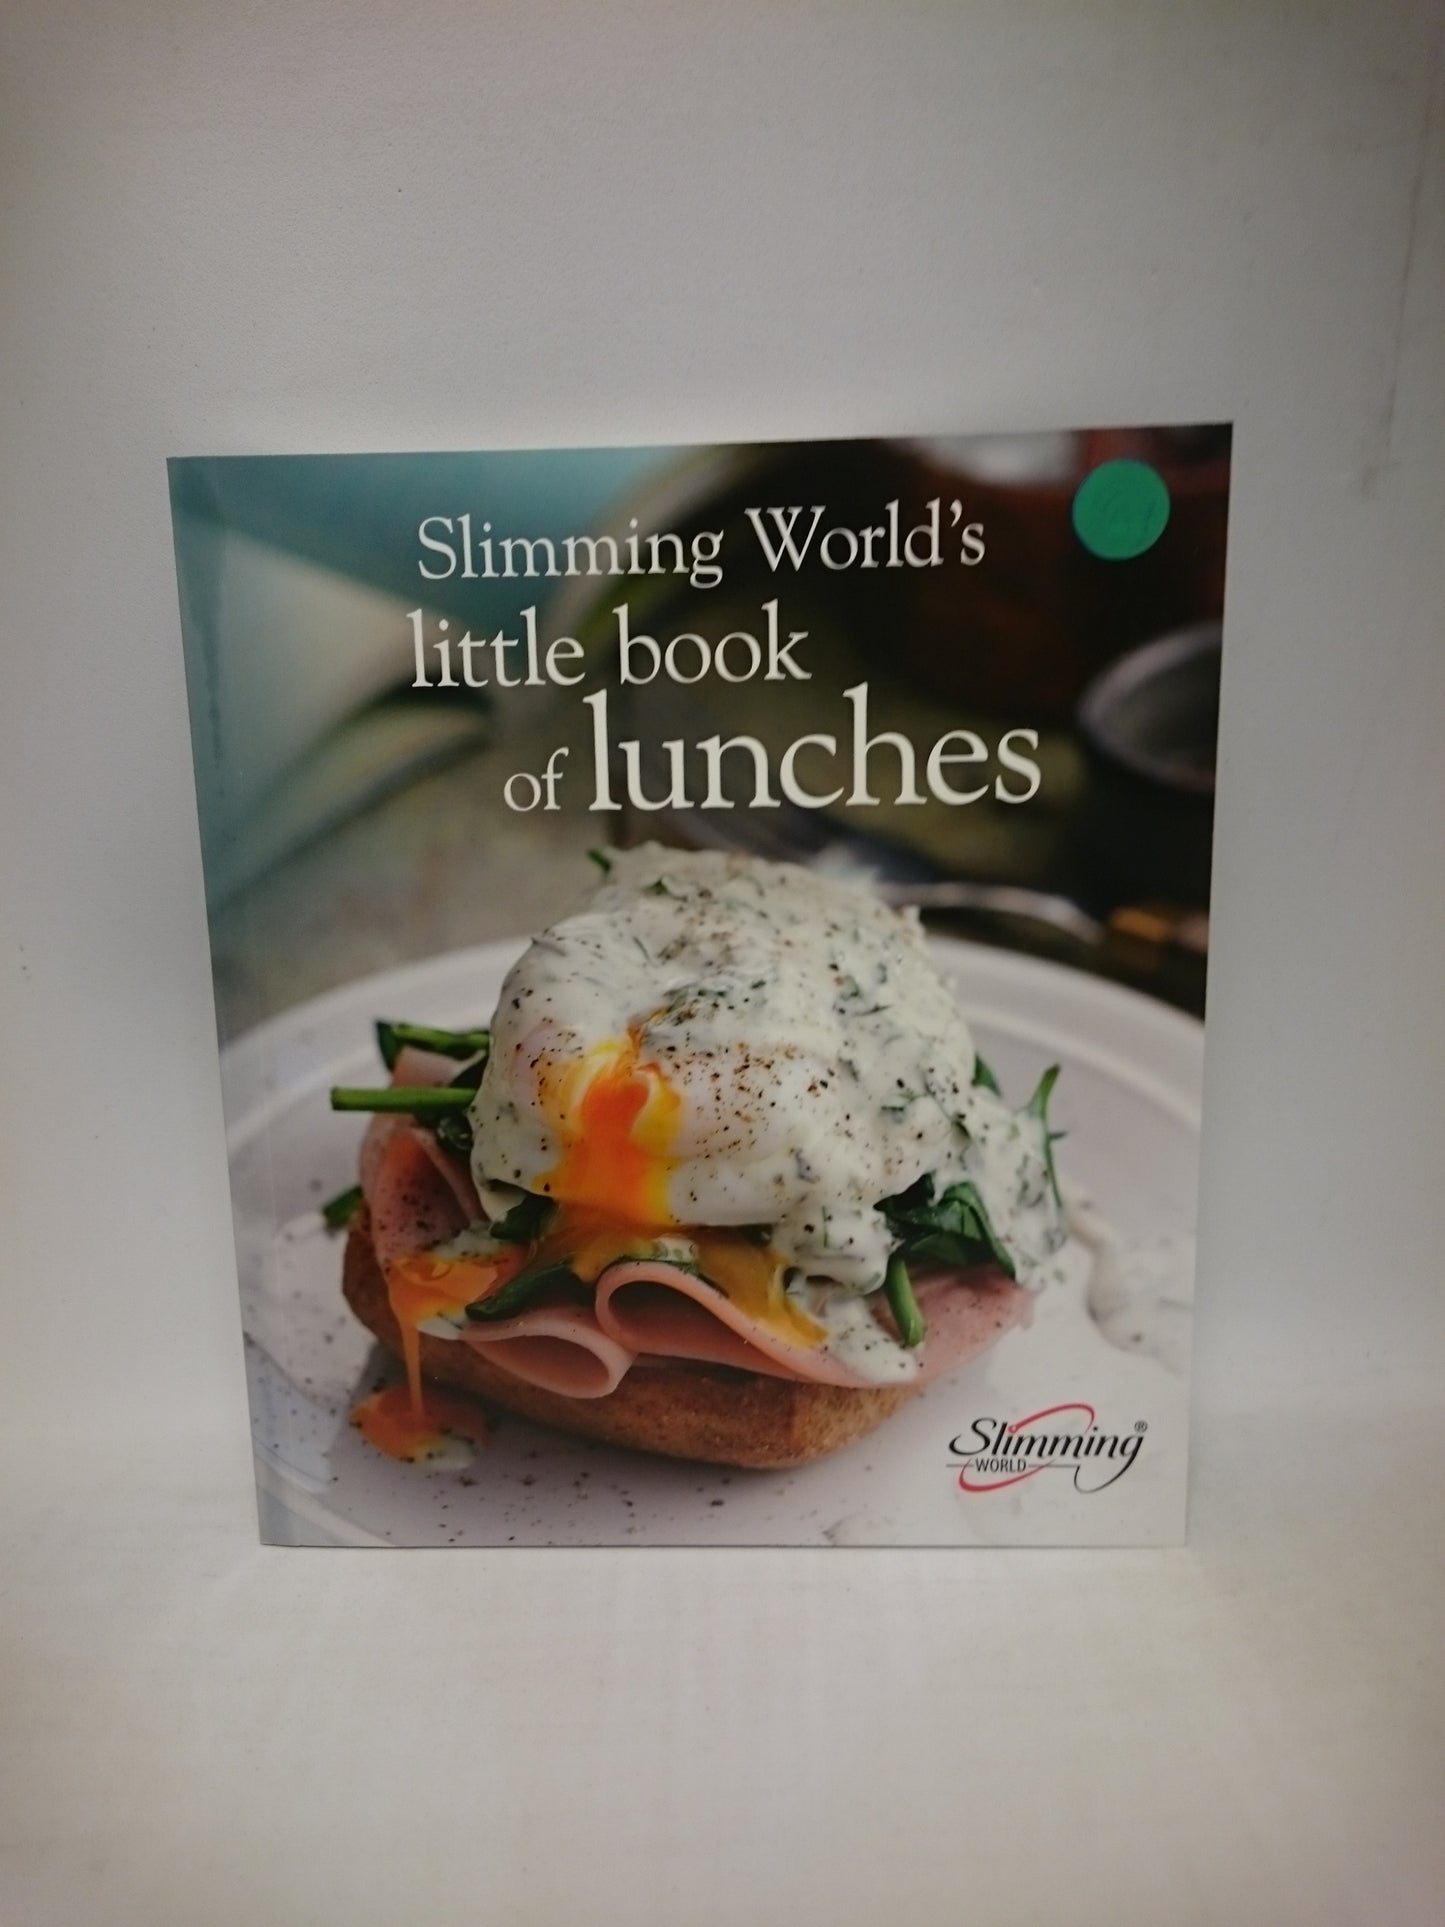 Slimming World's little book of lunches